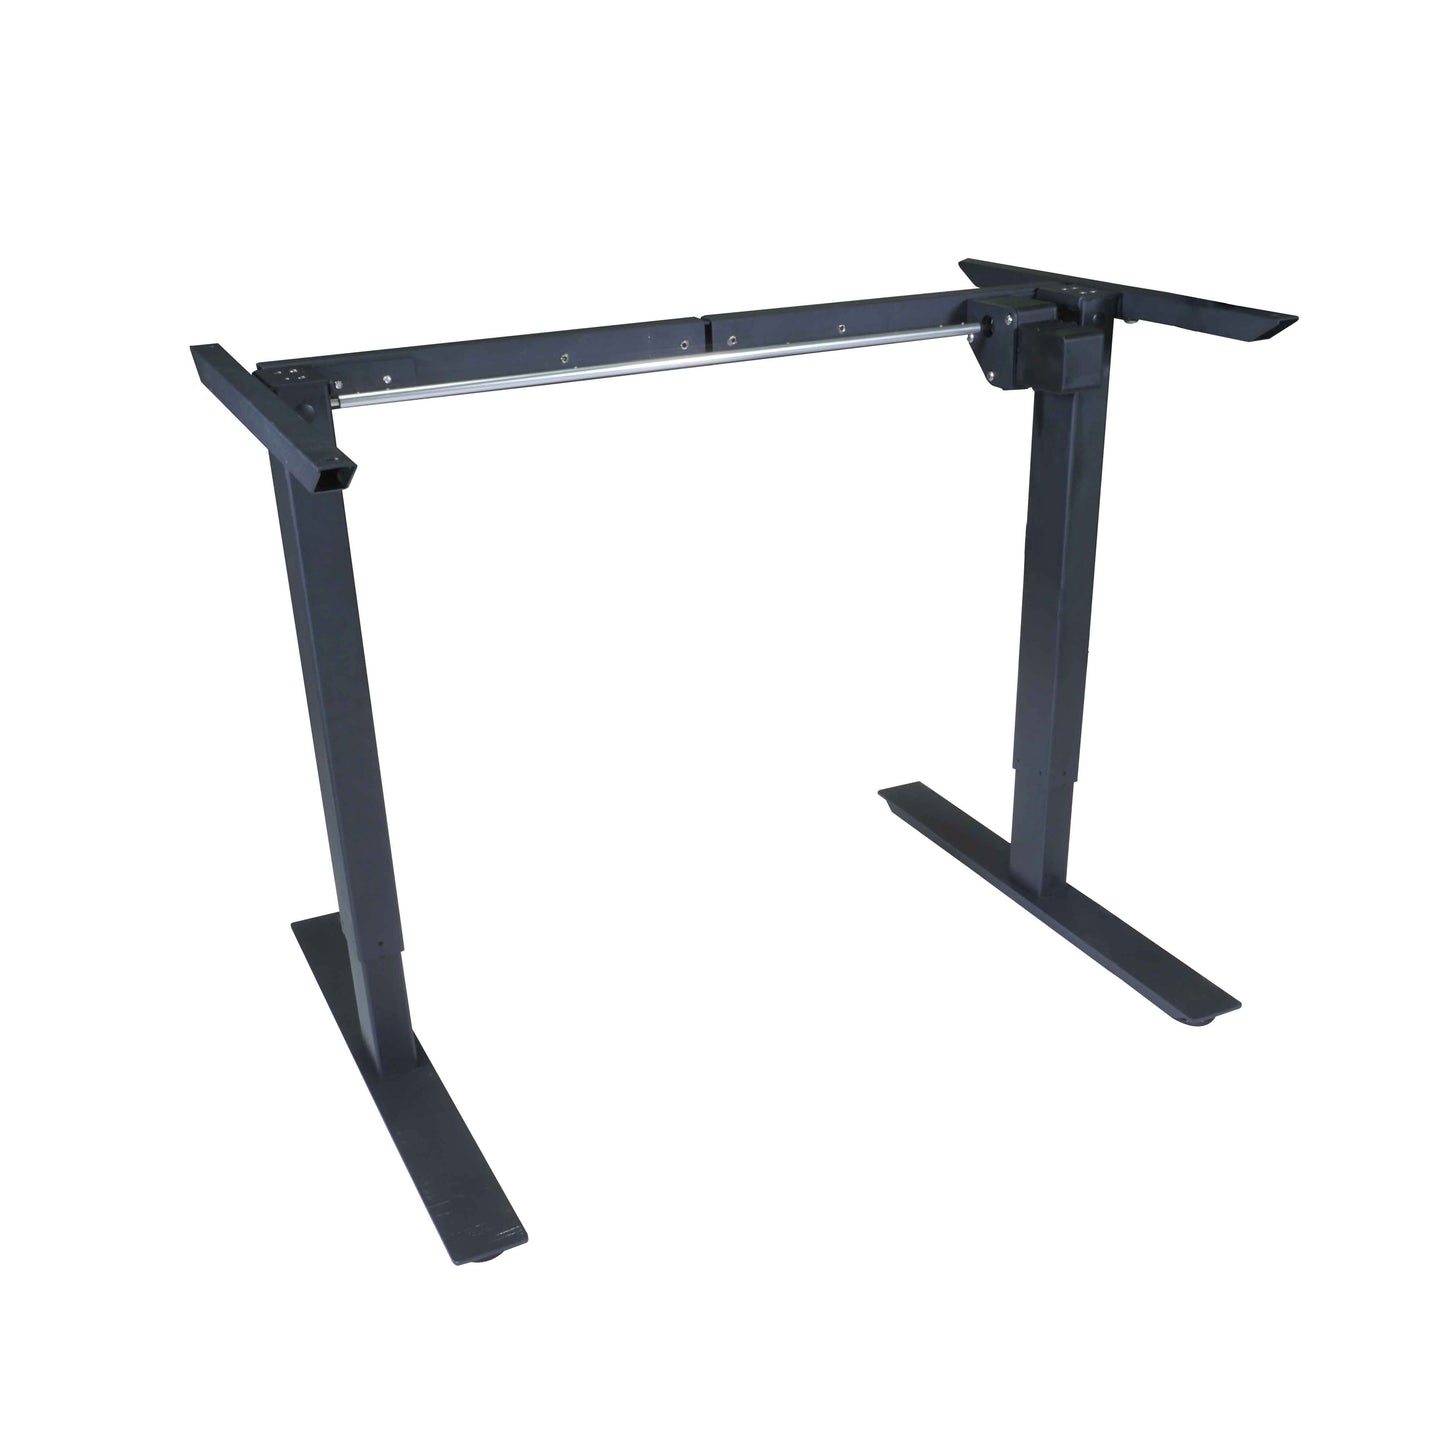 Single Motor Electric Adjustable Height A2 Sit-Stand Desk (Black) - view 3